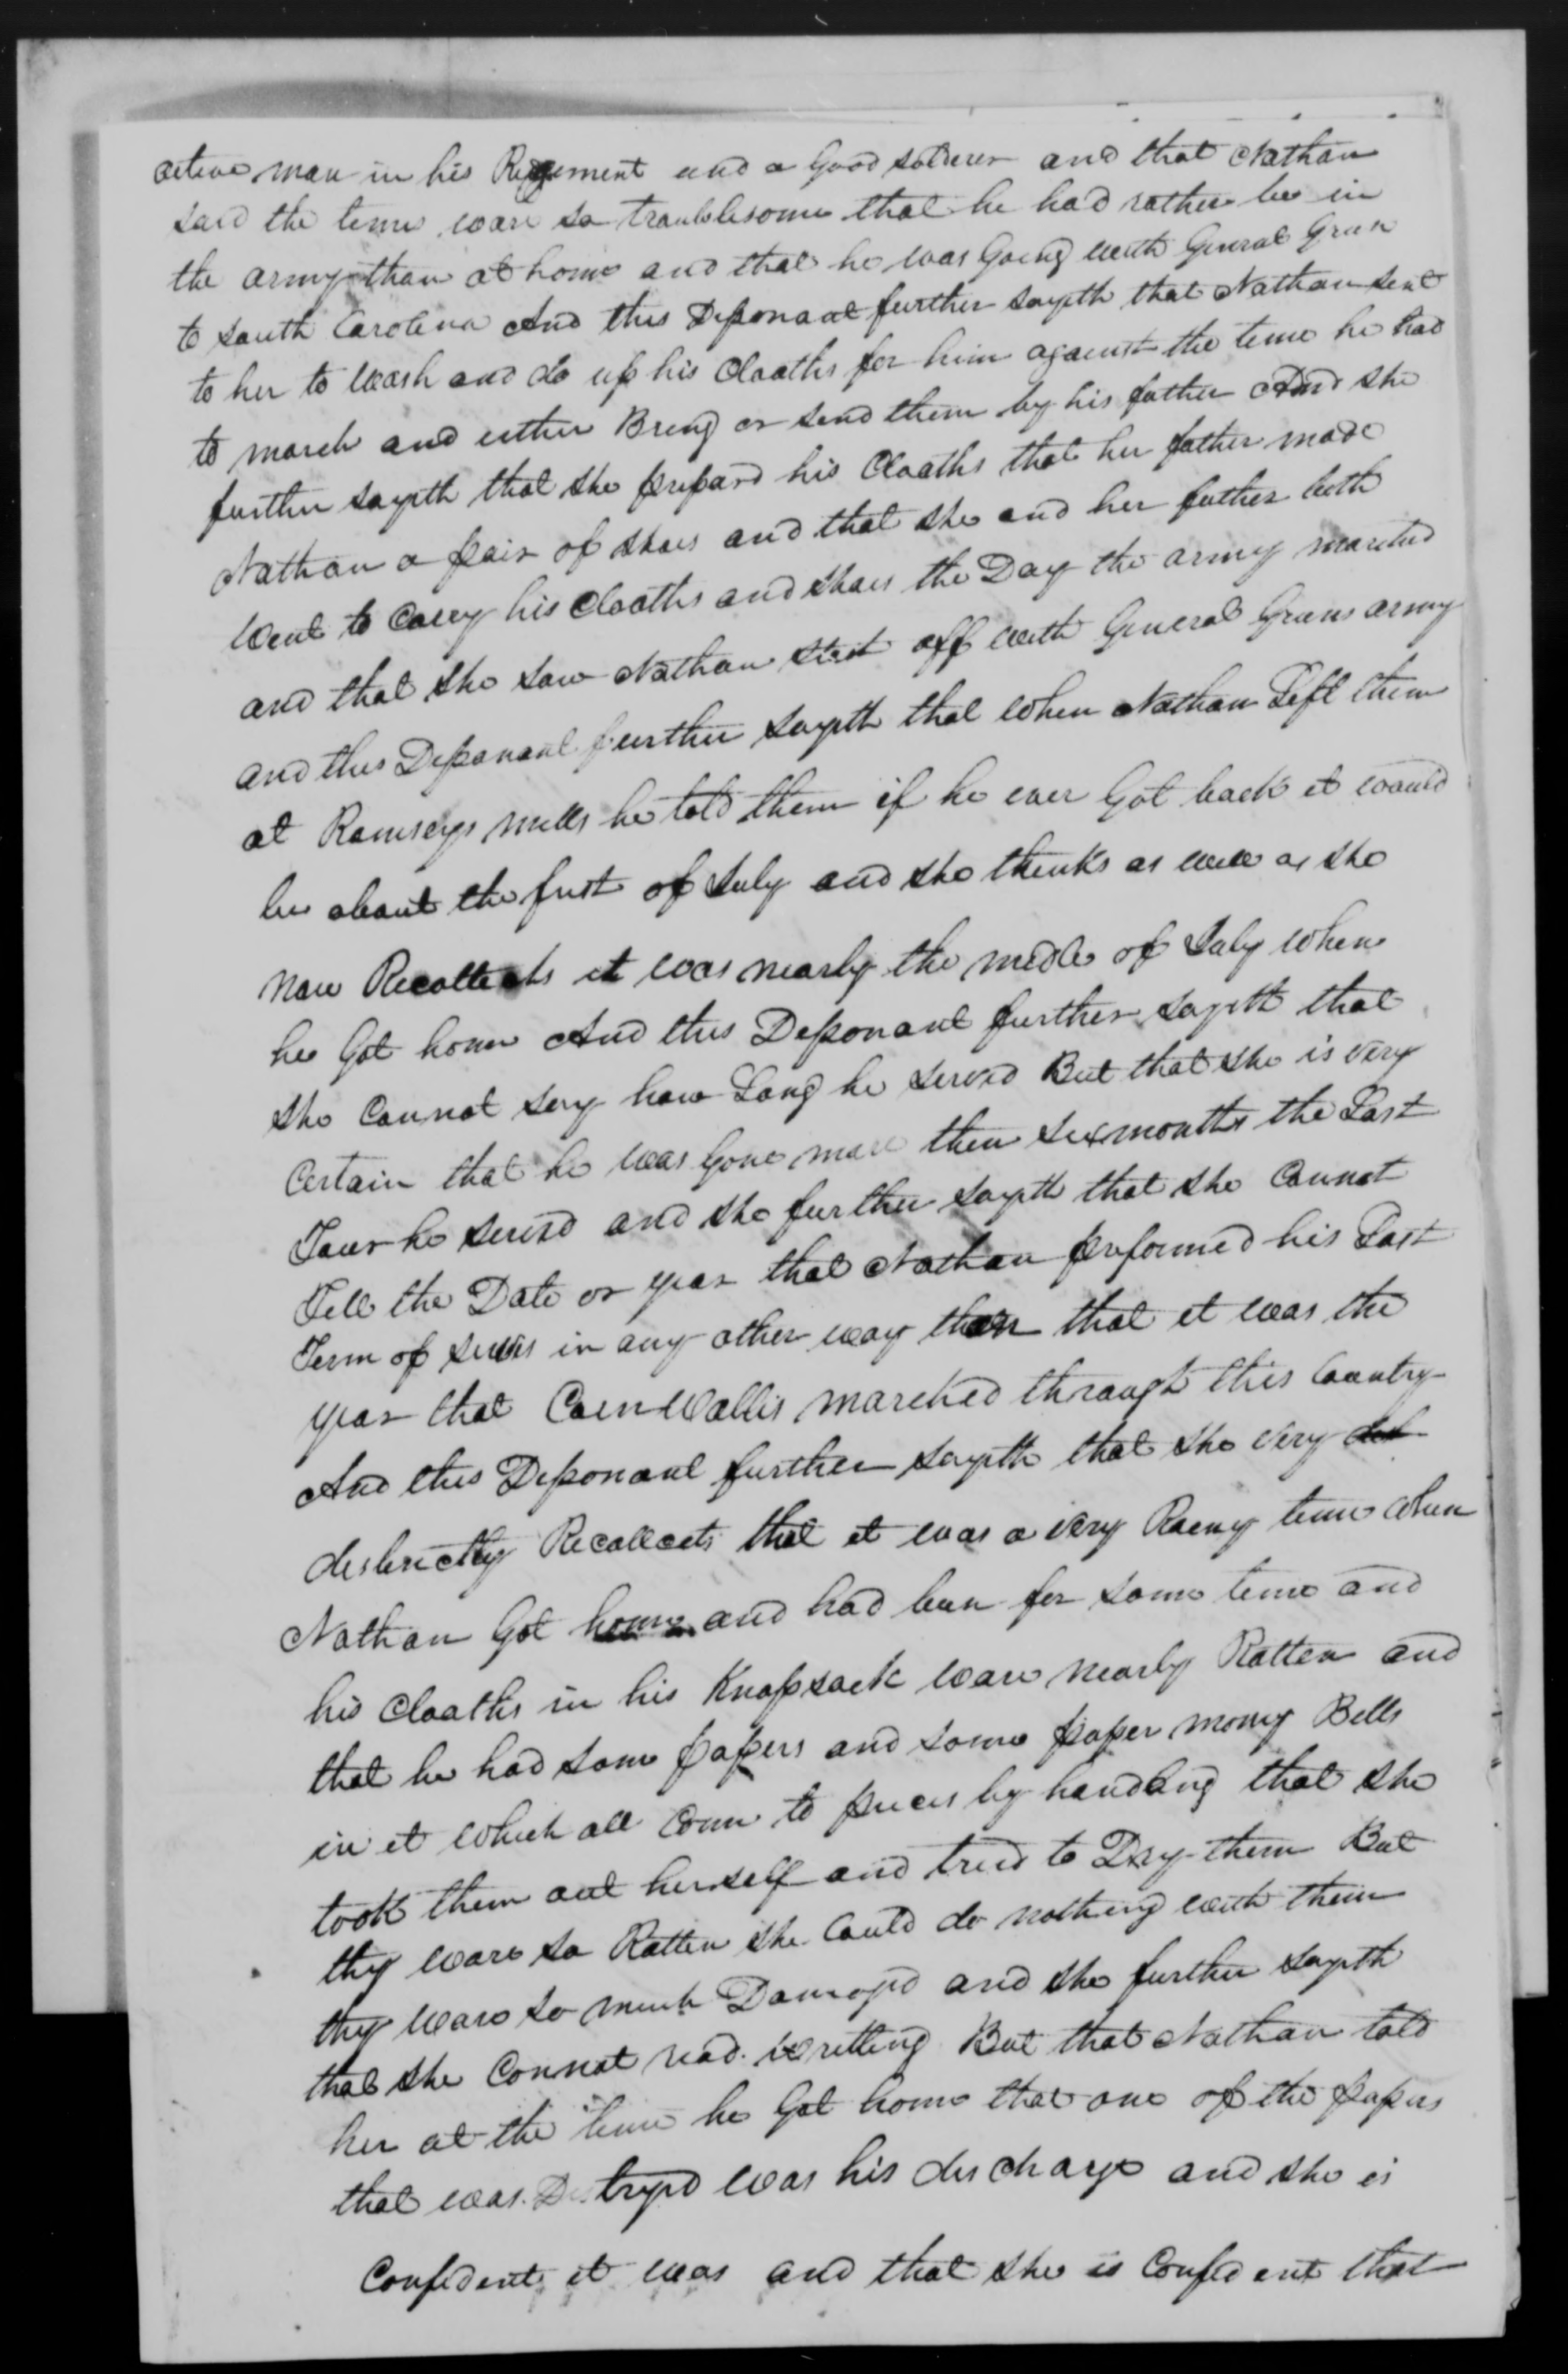 Affidavit of Milly Yarborough in support of a Pension Claim for Nathan Yarborough, 5 August 1833, page 3